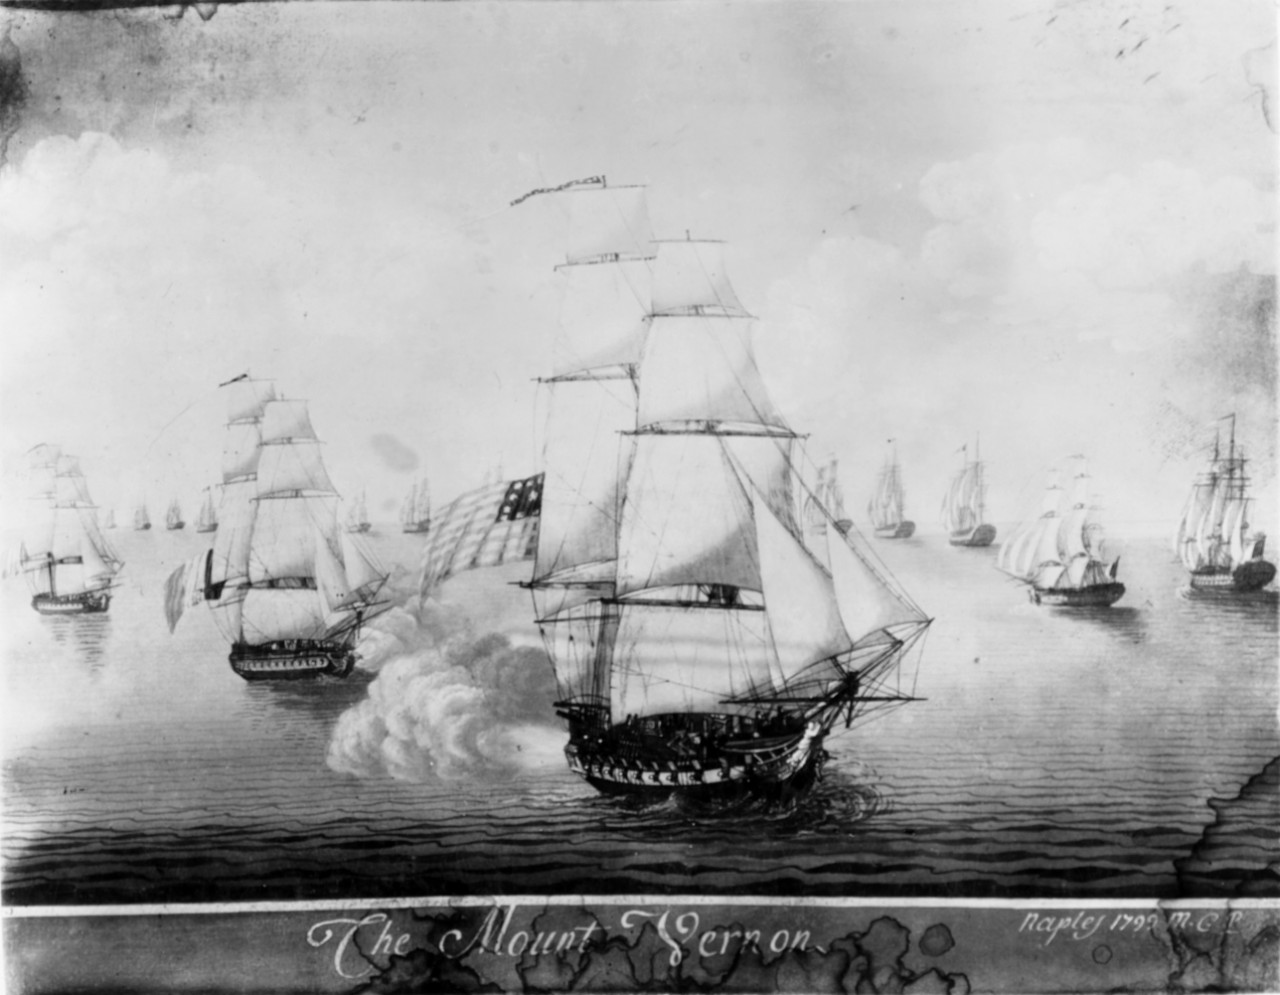 MOUNT VERNON against French Privateers